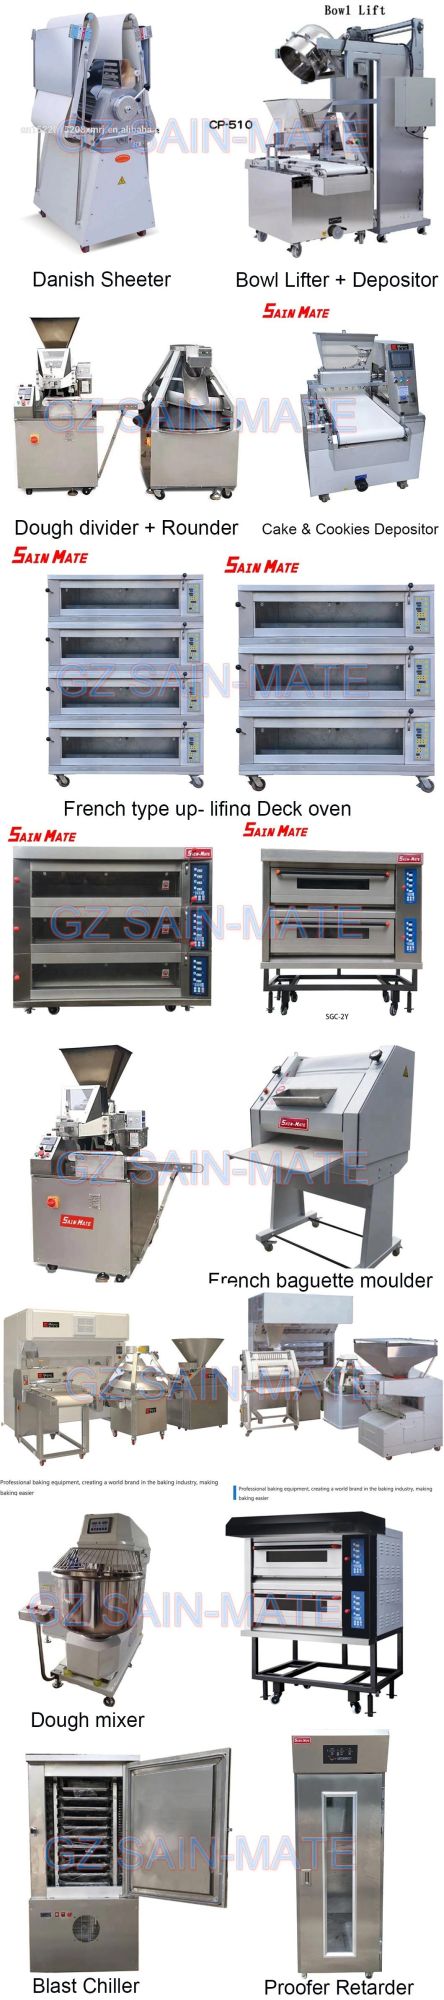 Industrial Gas Bakery Cake Bread Naking Rotary Furnacehot Wind 32 Tray Electric Rotary Furnace Bakery